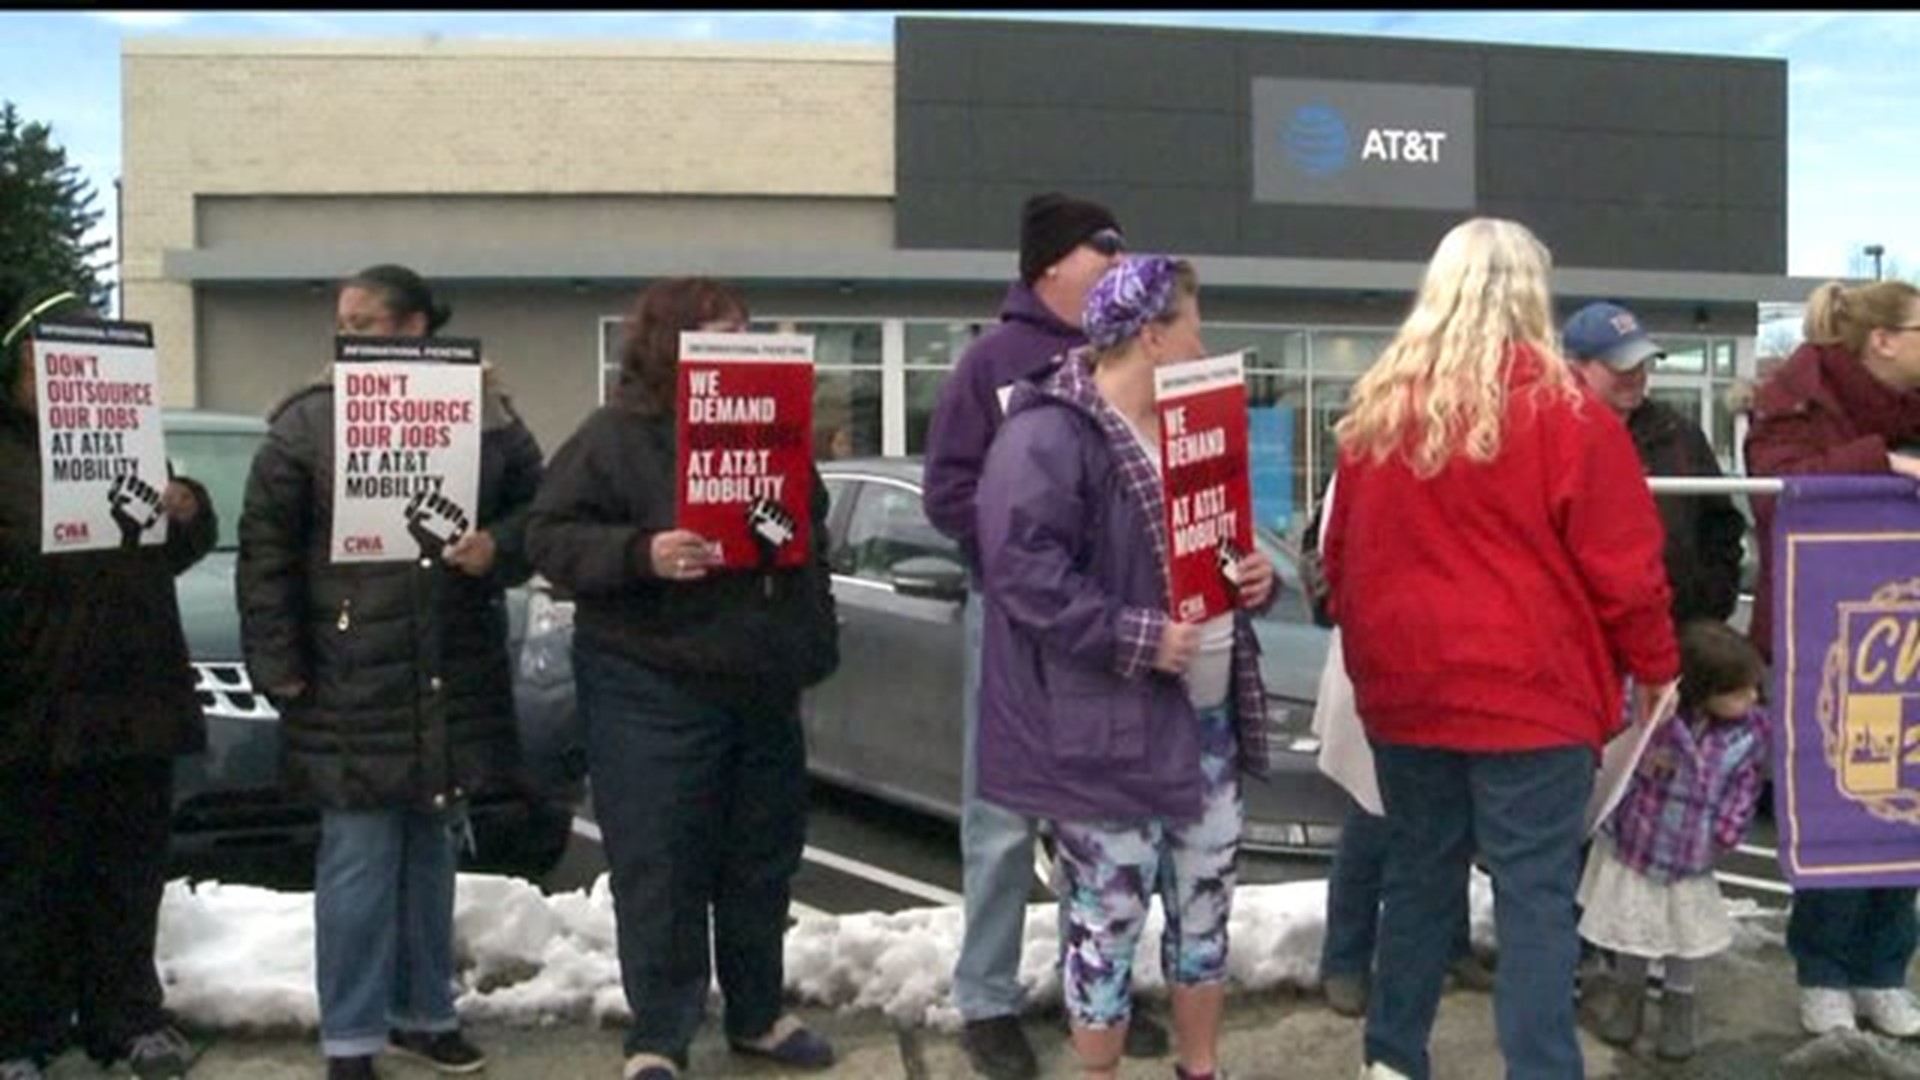 AT&T Employees rally for new contract in Dauphin County